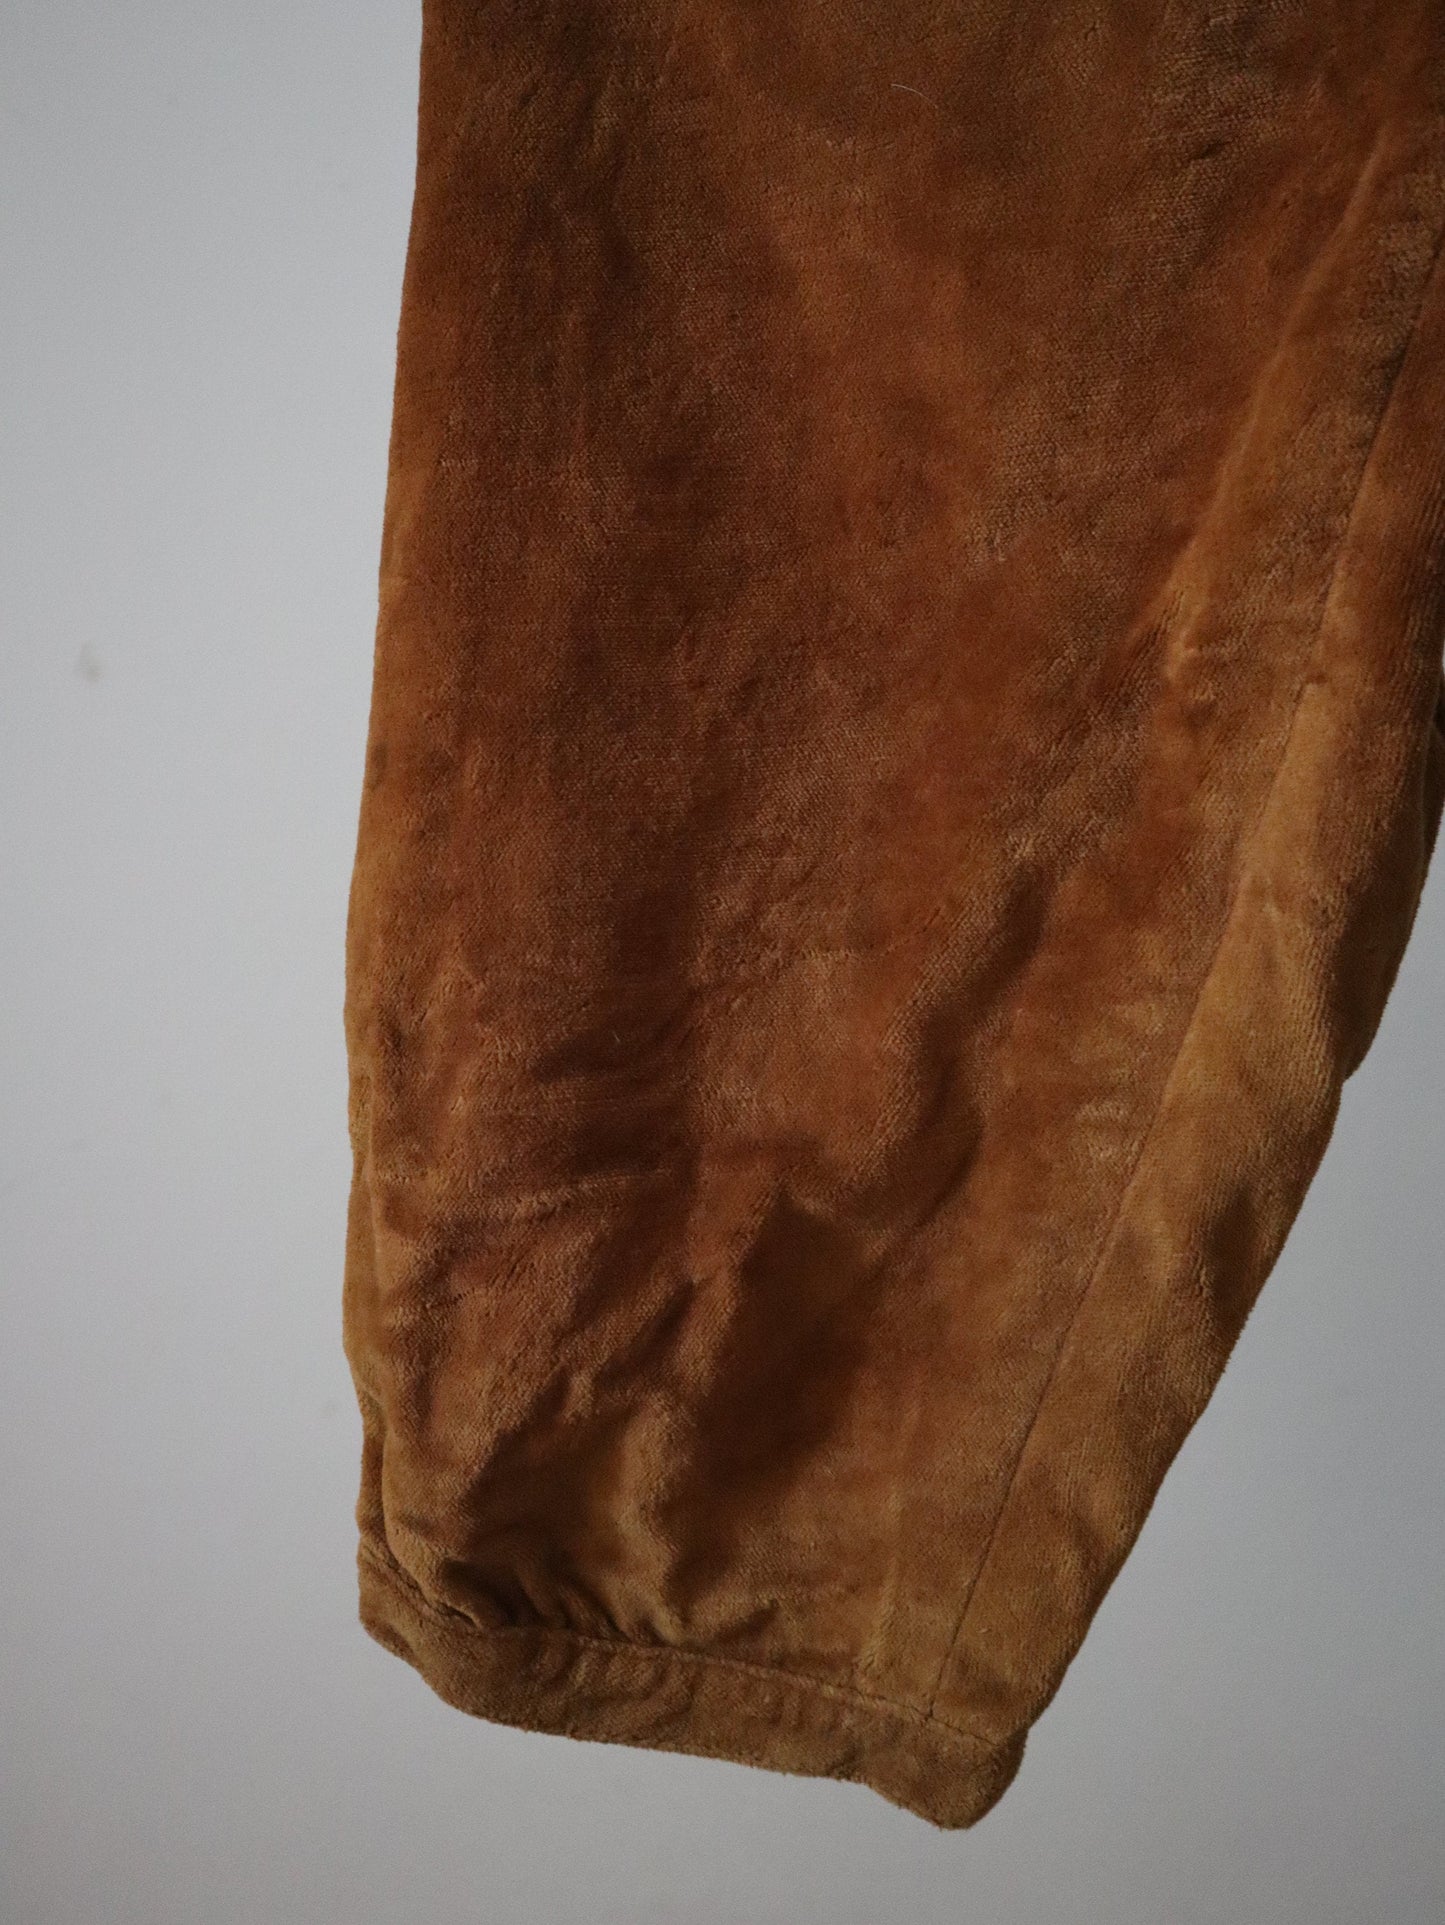 Antique French Brown Teddy Cotton Velvet Breeches Theatre Opéra Pants Trousers